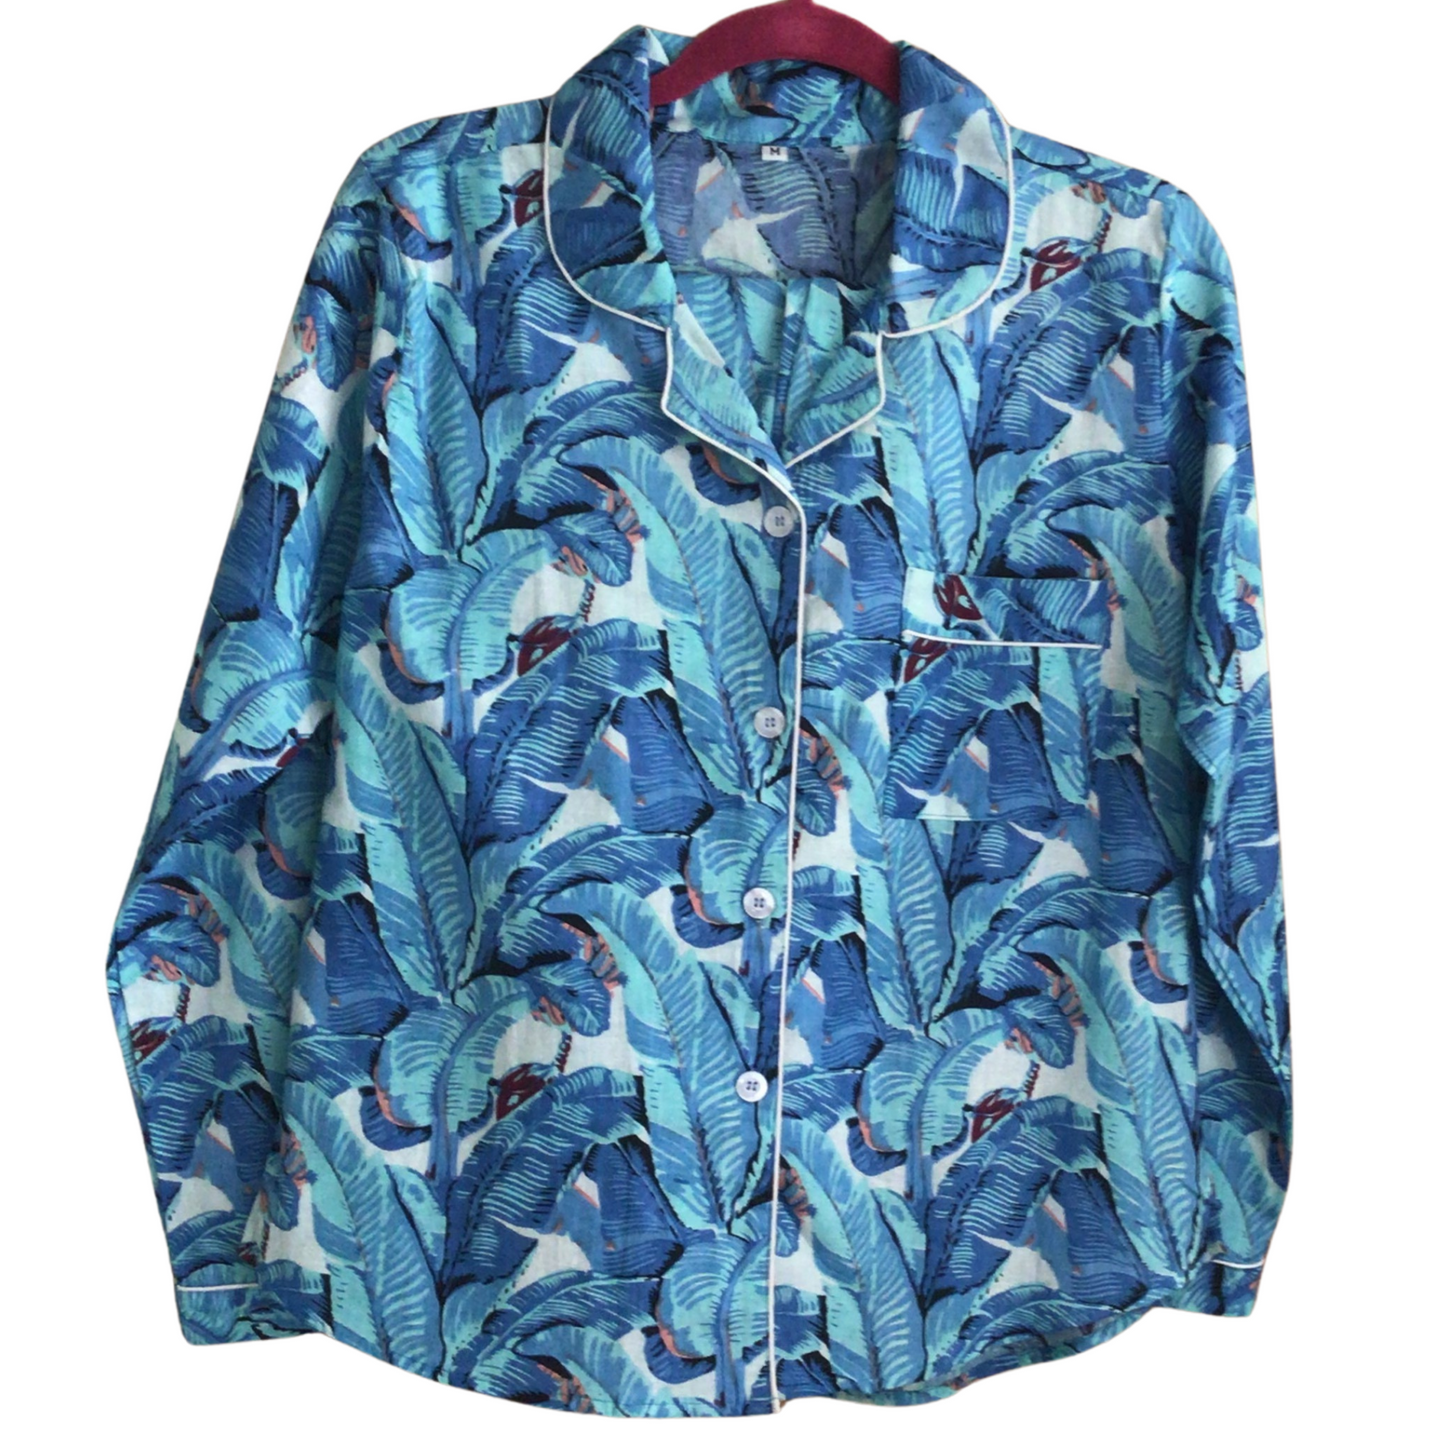 Stunning Blue leaves patterned dressing gown in a Tropical design Traditional Style 100% cotton gift wrapped pjs, Pyjamas for women, pyjama set for women, patterned pyjamas for women, ladies pyjama, womens nightwear, womens sleepwear, cotton pyjamas, colourful pyjamas for women, colourful womens sleepwear, cotton pyjama set, 100% cotton, cotton pjs, blue patterned pyjamas